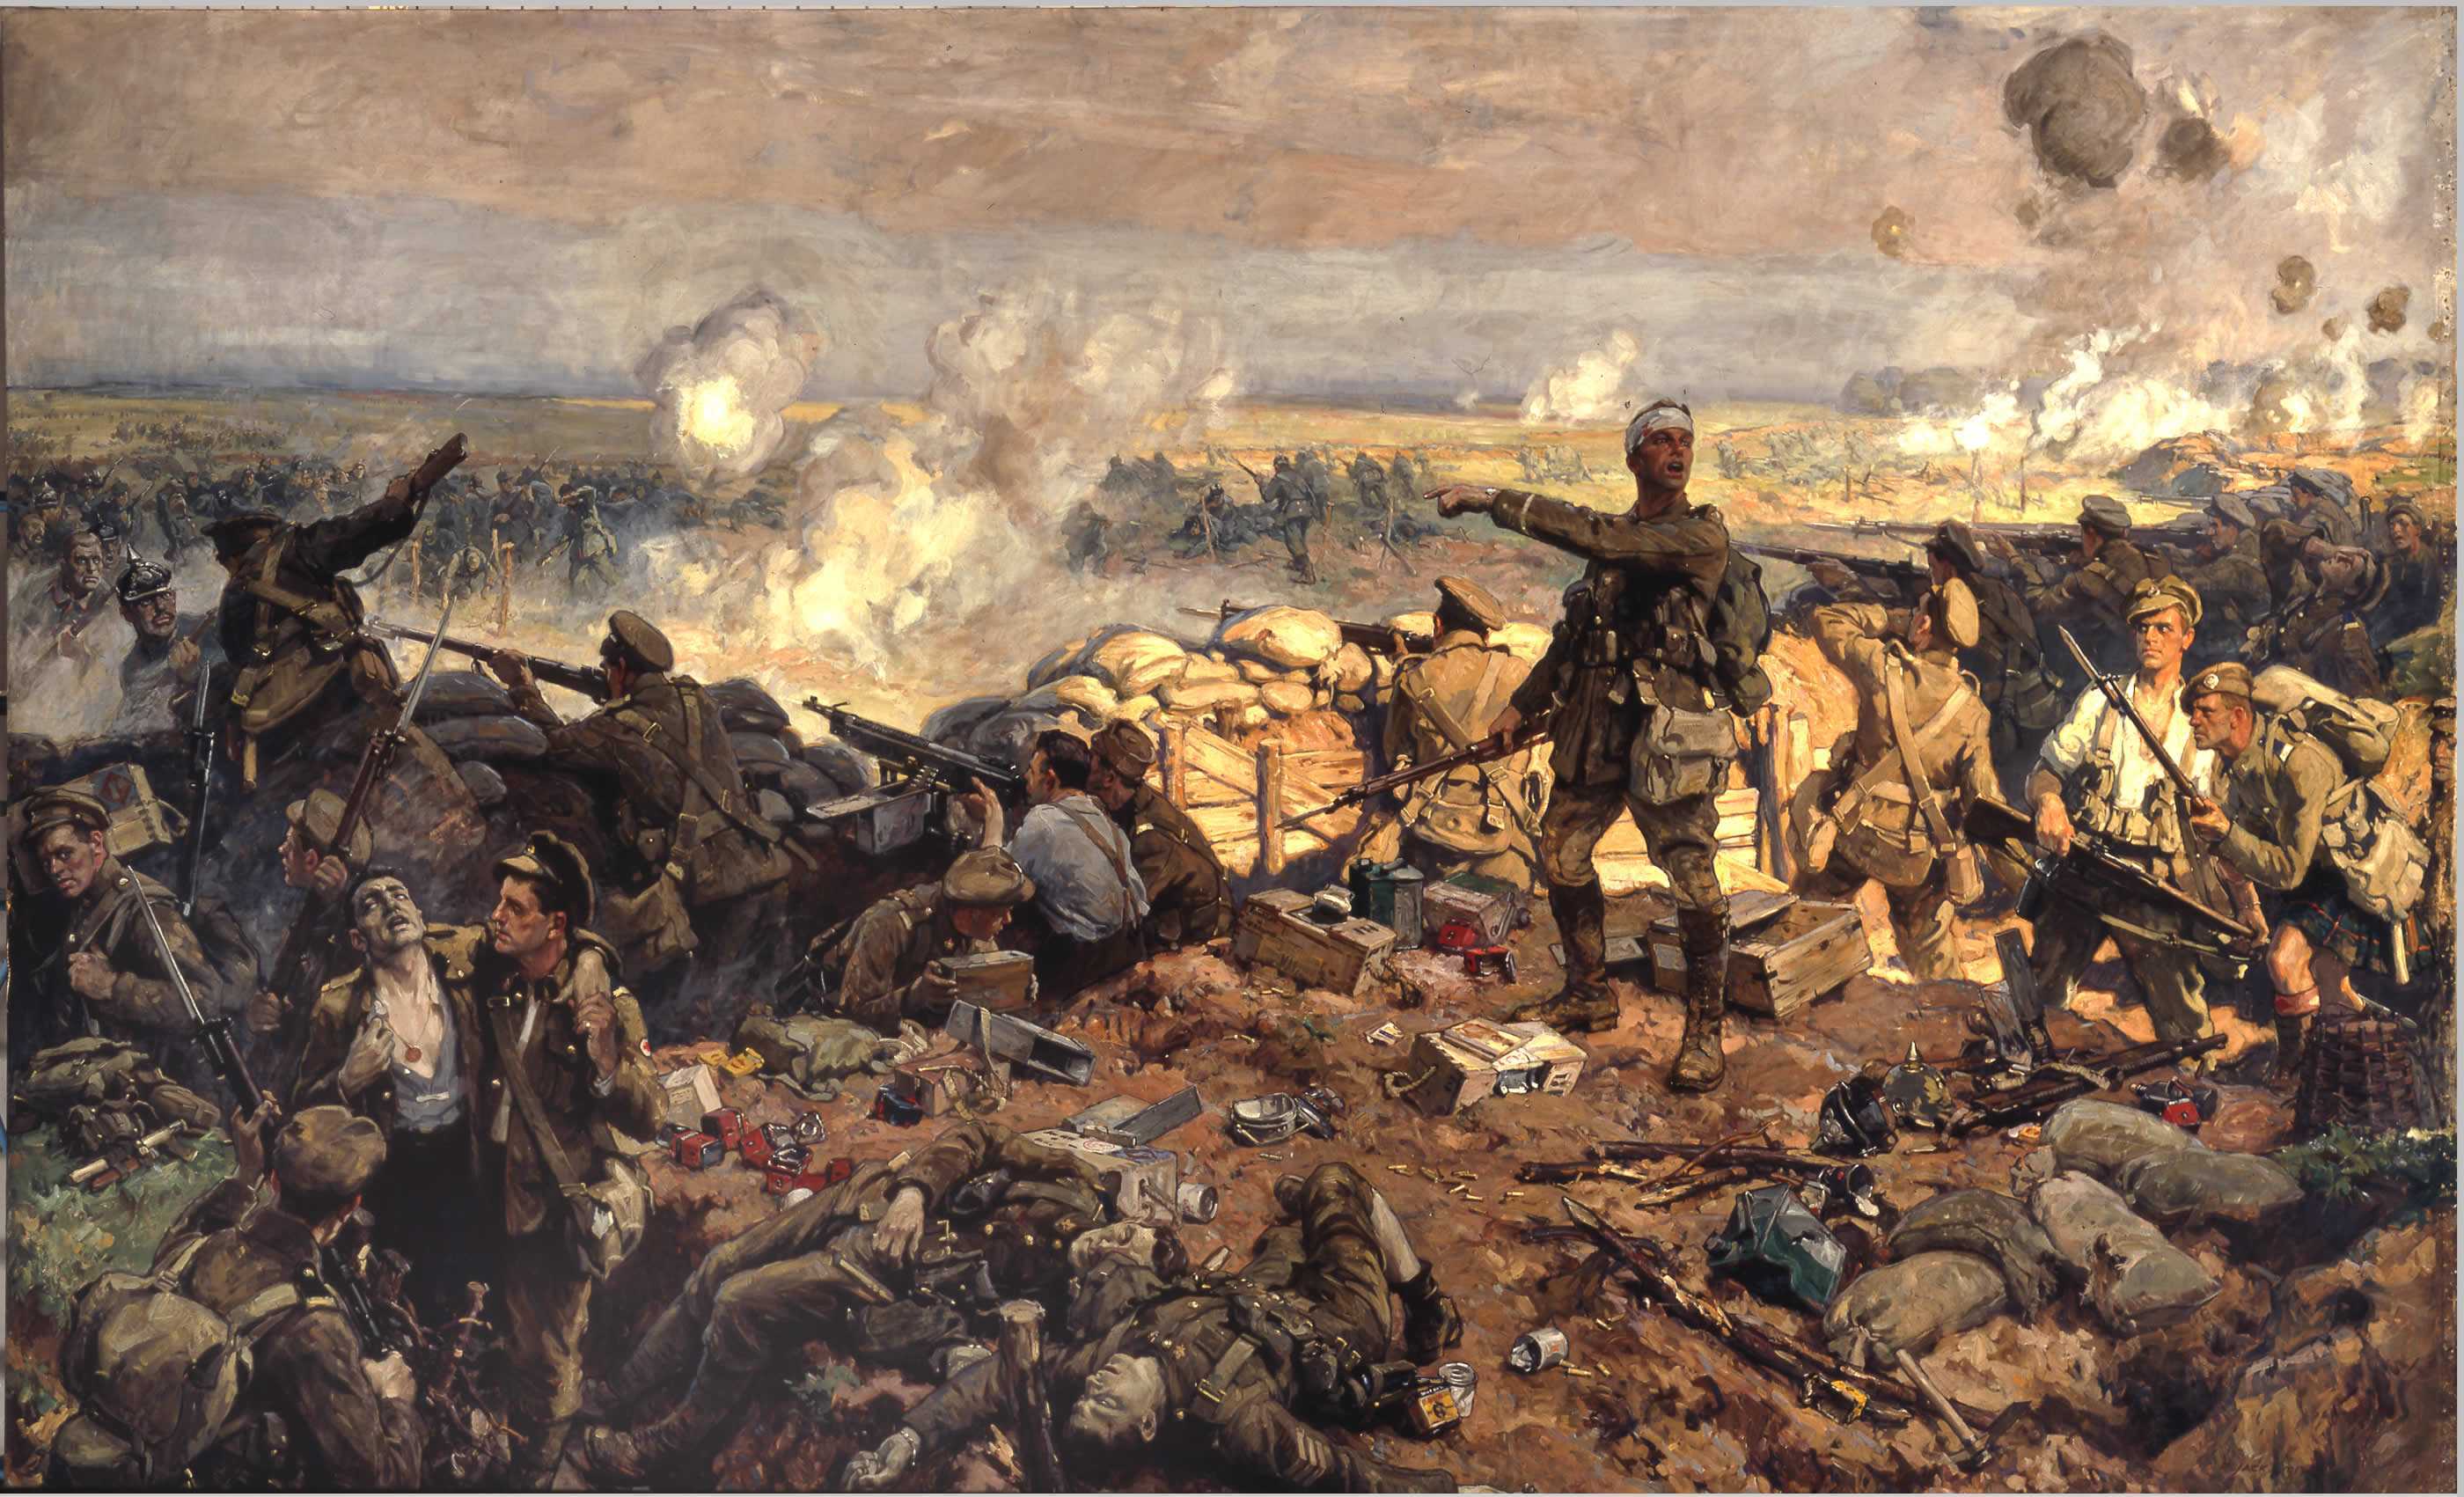 The painting by Richard Jack uses yellow tones to depict the battle scene at Ypres. Canadian soldiers can be seen fighting and dying in the trenches, among the mud and gas.